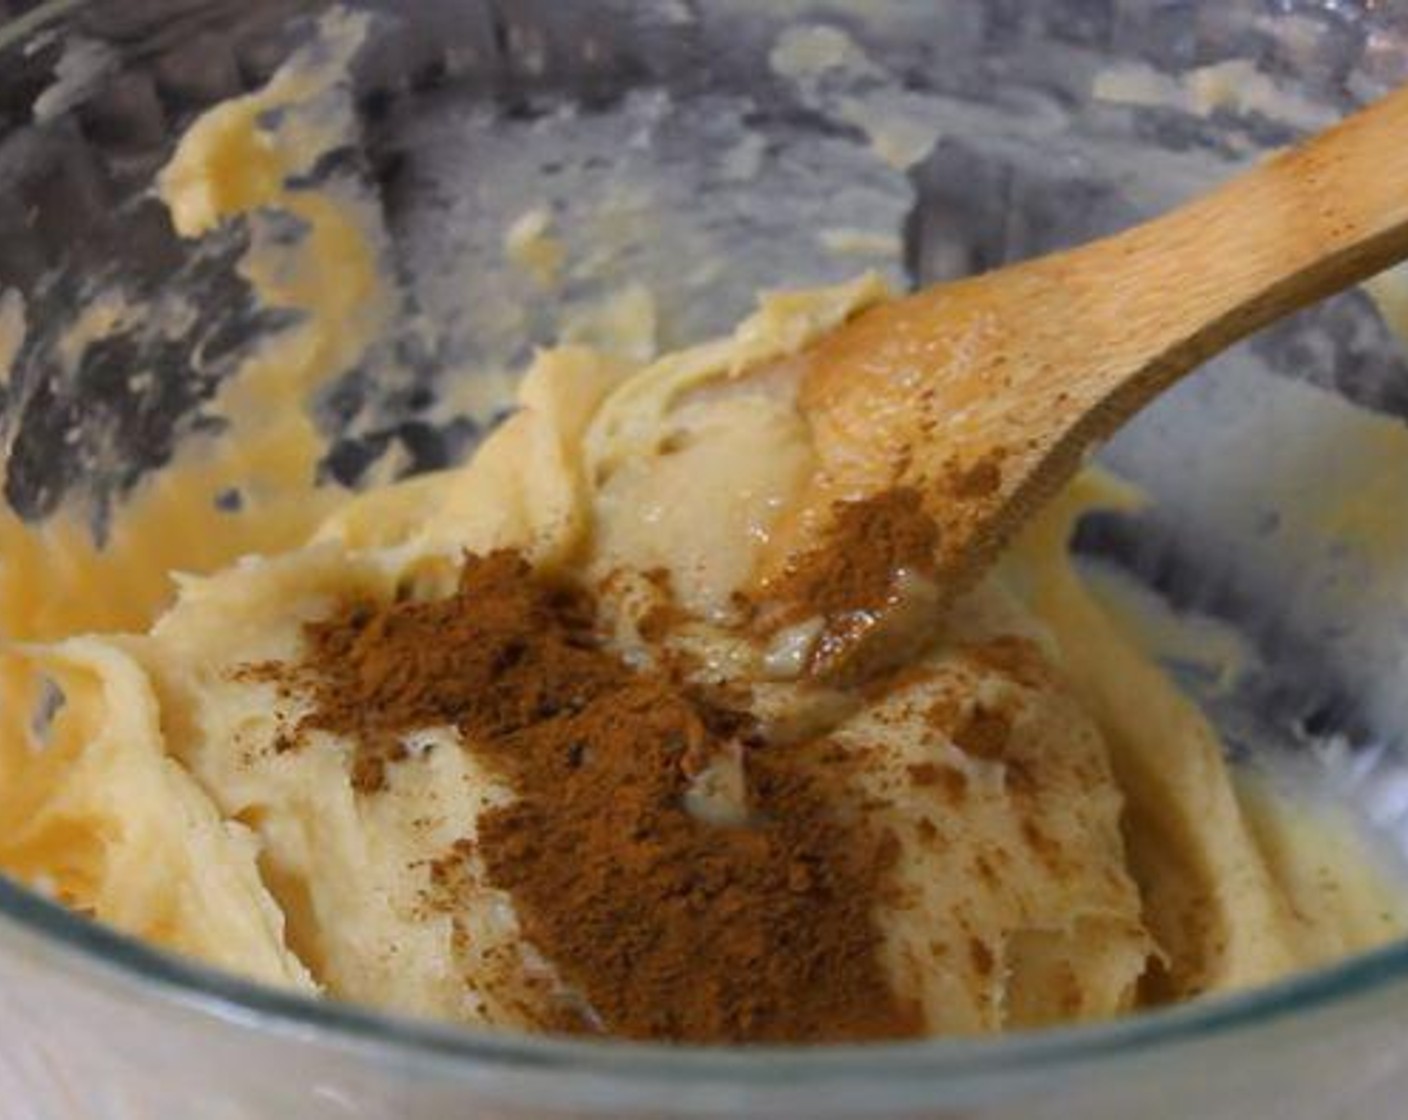 step 2 Transfer the batter to a bowl. Beat with a wooden spoon to spread it out, then add the Farmhouse Eggs® Large Brown Eggs (3) one at a time and mixing after each. Add in the Ground Cinnamon (1/2 tsp).